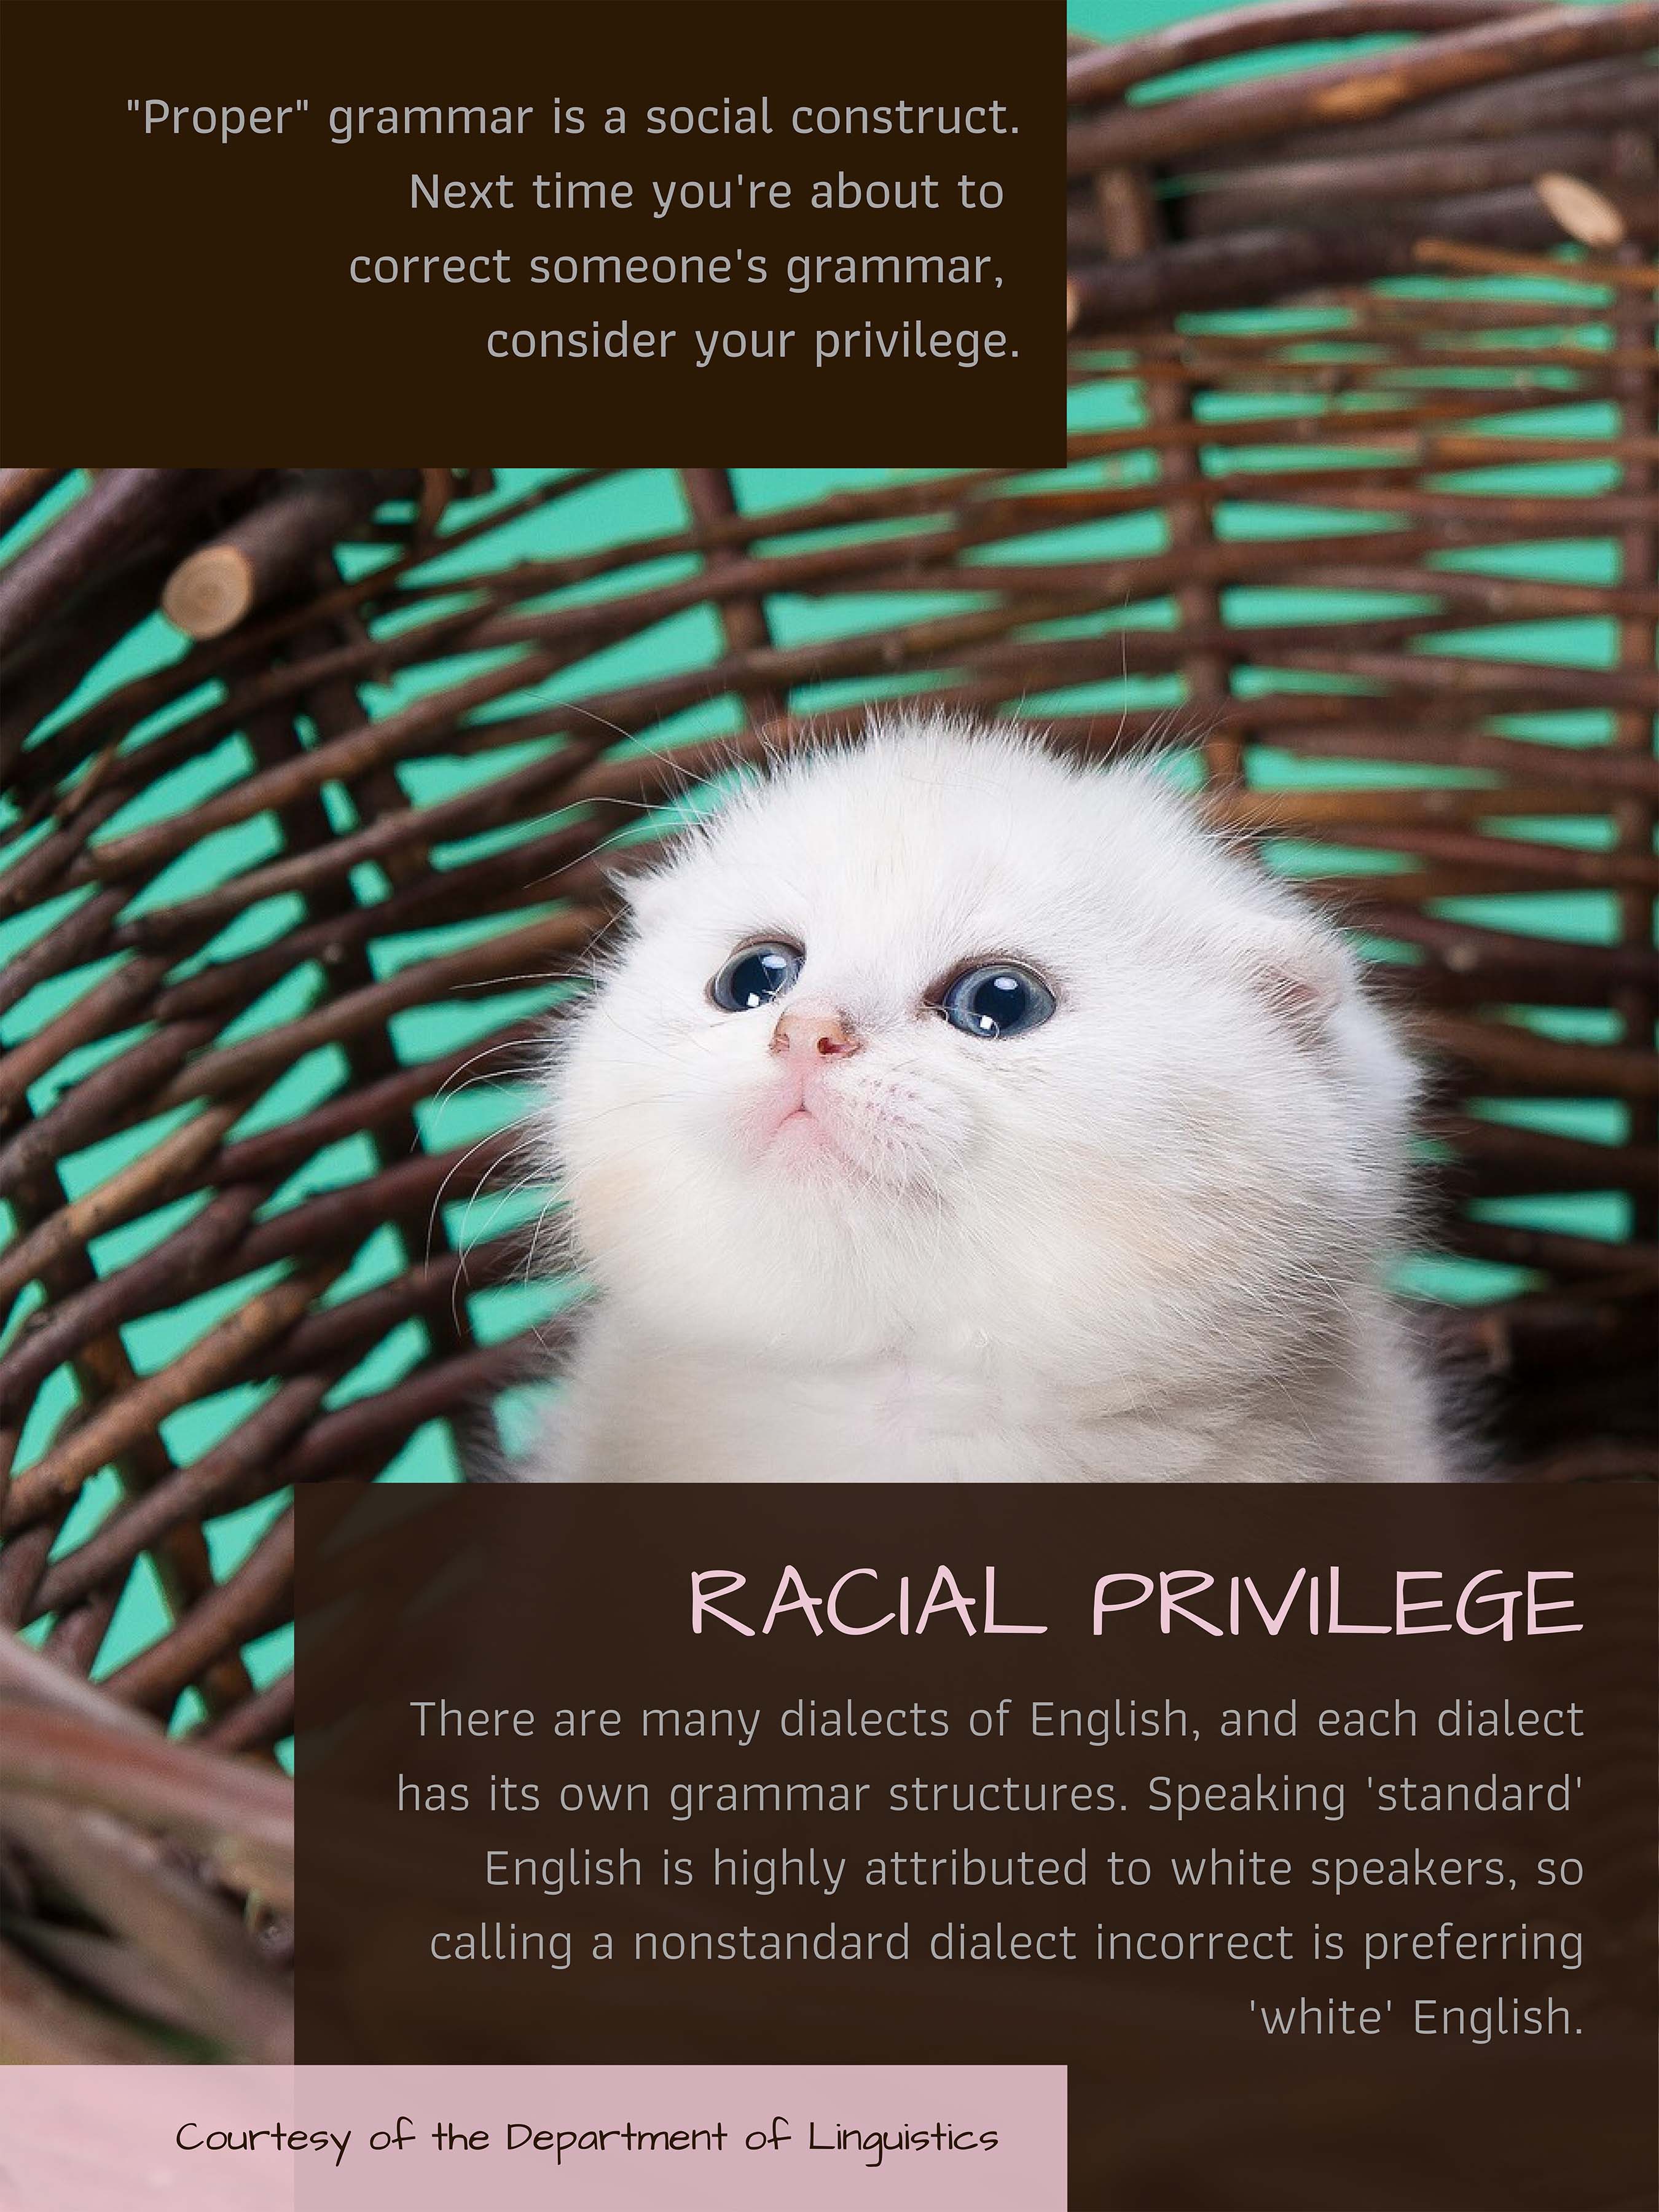 "Proper" grammar is a social construct. Consider your racial privilege. Click on image for full description.